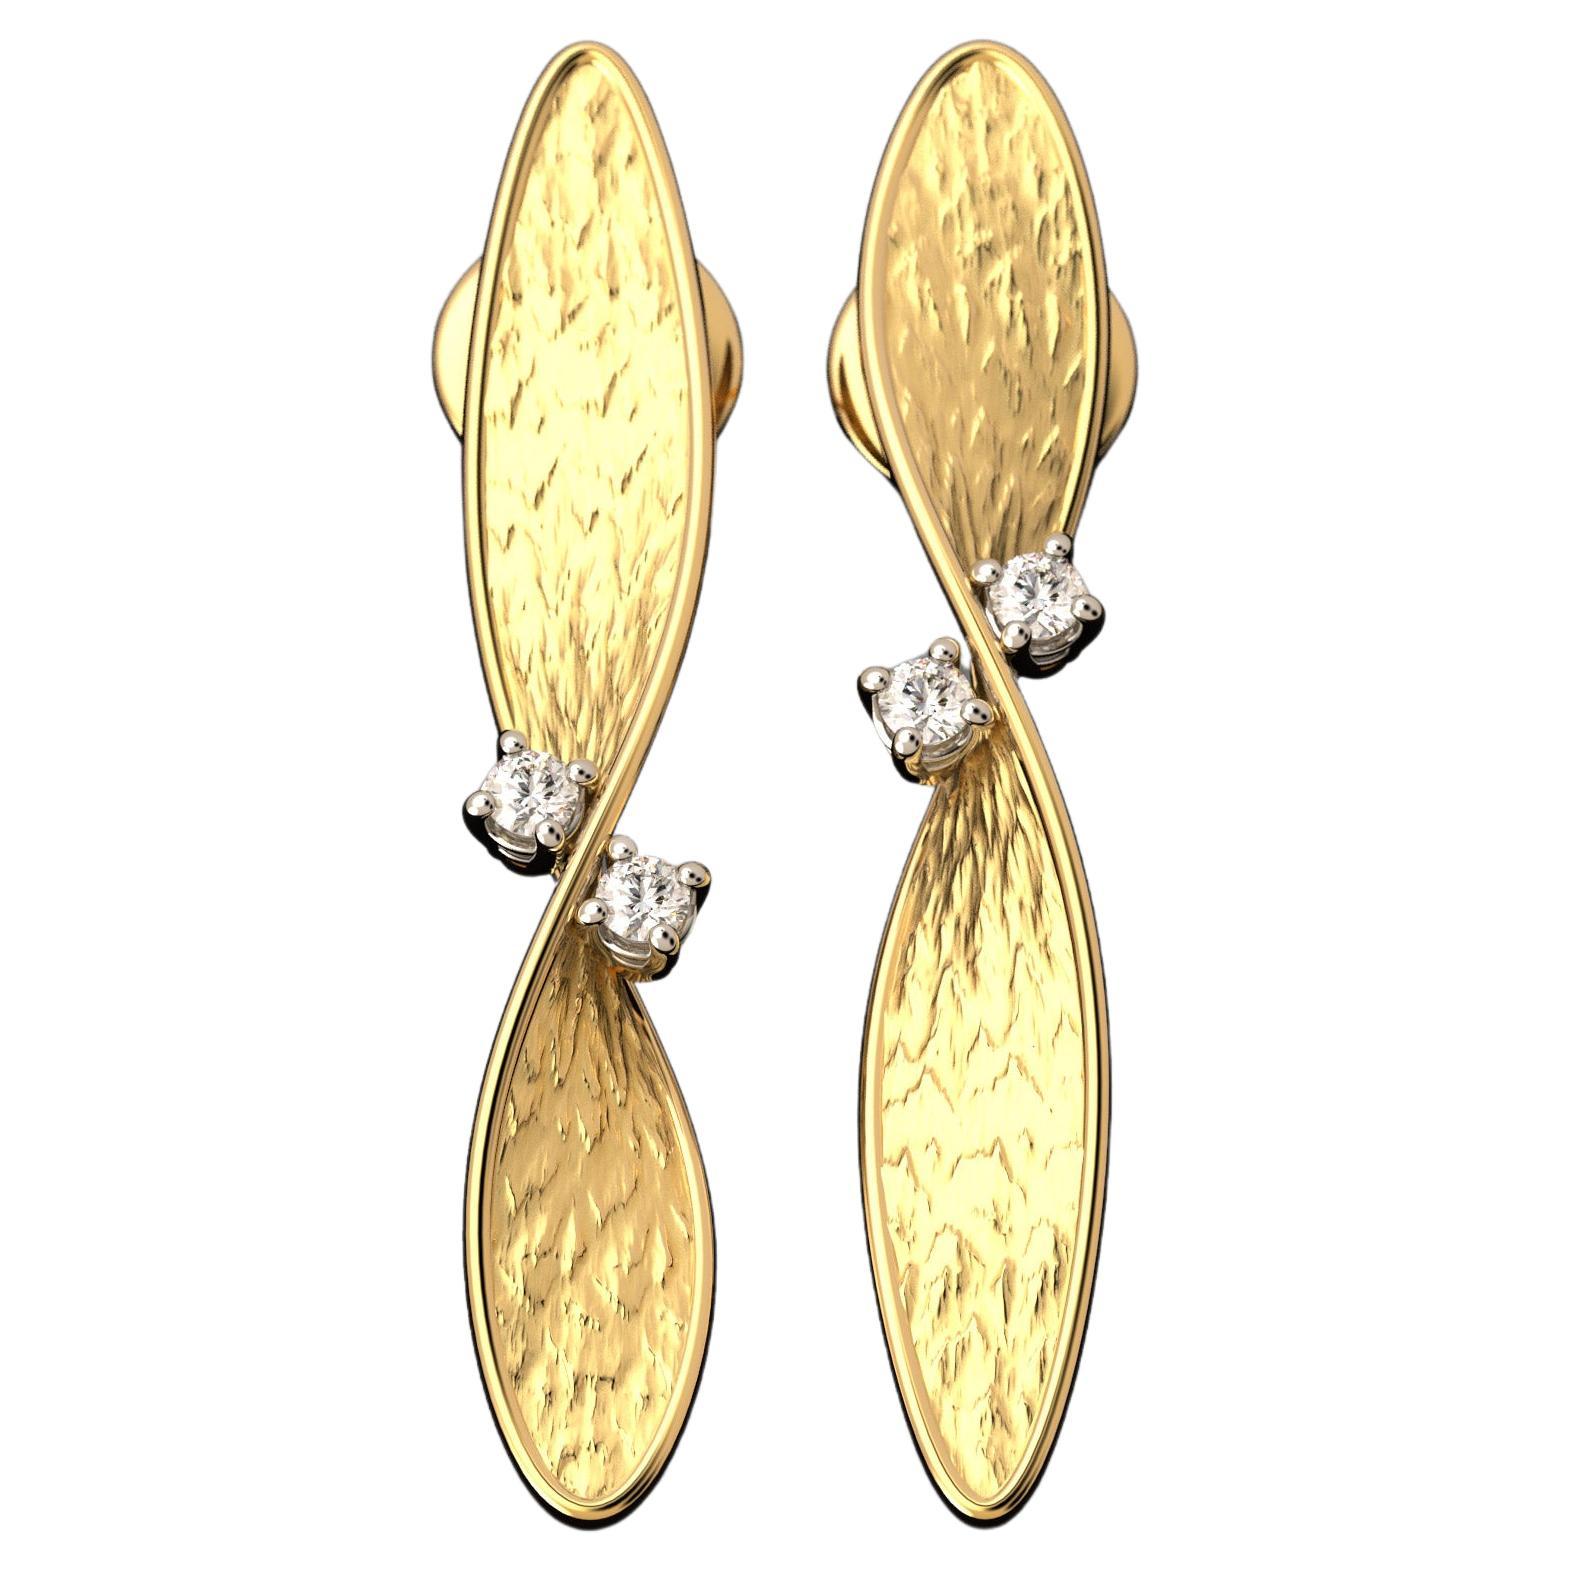 Contemporary Oltremare Gioielli, Italian Jewelry, 14k Gold Diamond Earrings Made in Italy For Sale